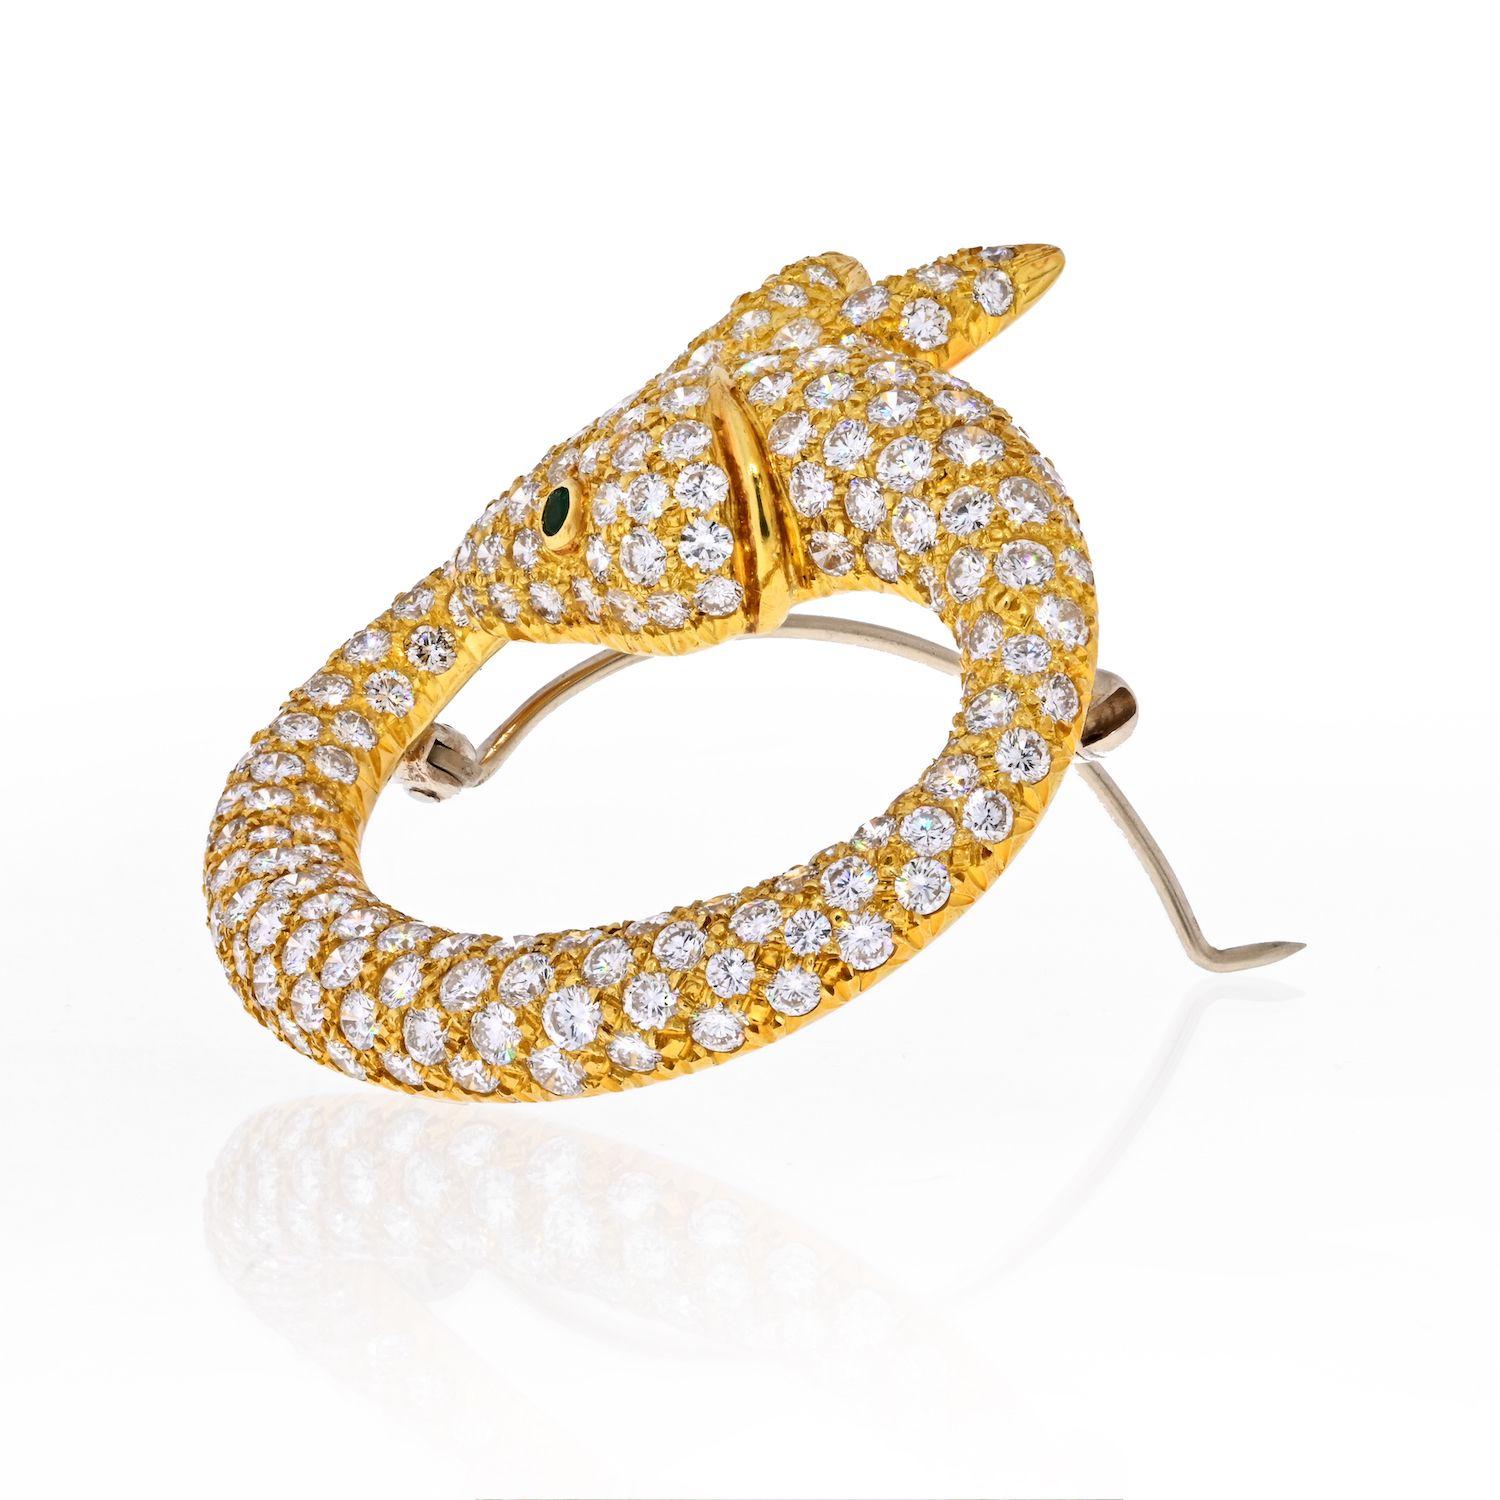 If you are into wearable art then this is the brooch for you. Made in 18K Yellow Gold this brooch is fashioned as a diamond Koi Fish with emerald eye. Brilliant brooch is made with quality round brilliant cut diamonds, with minimal material showing